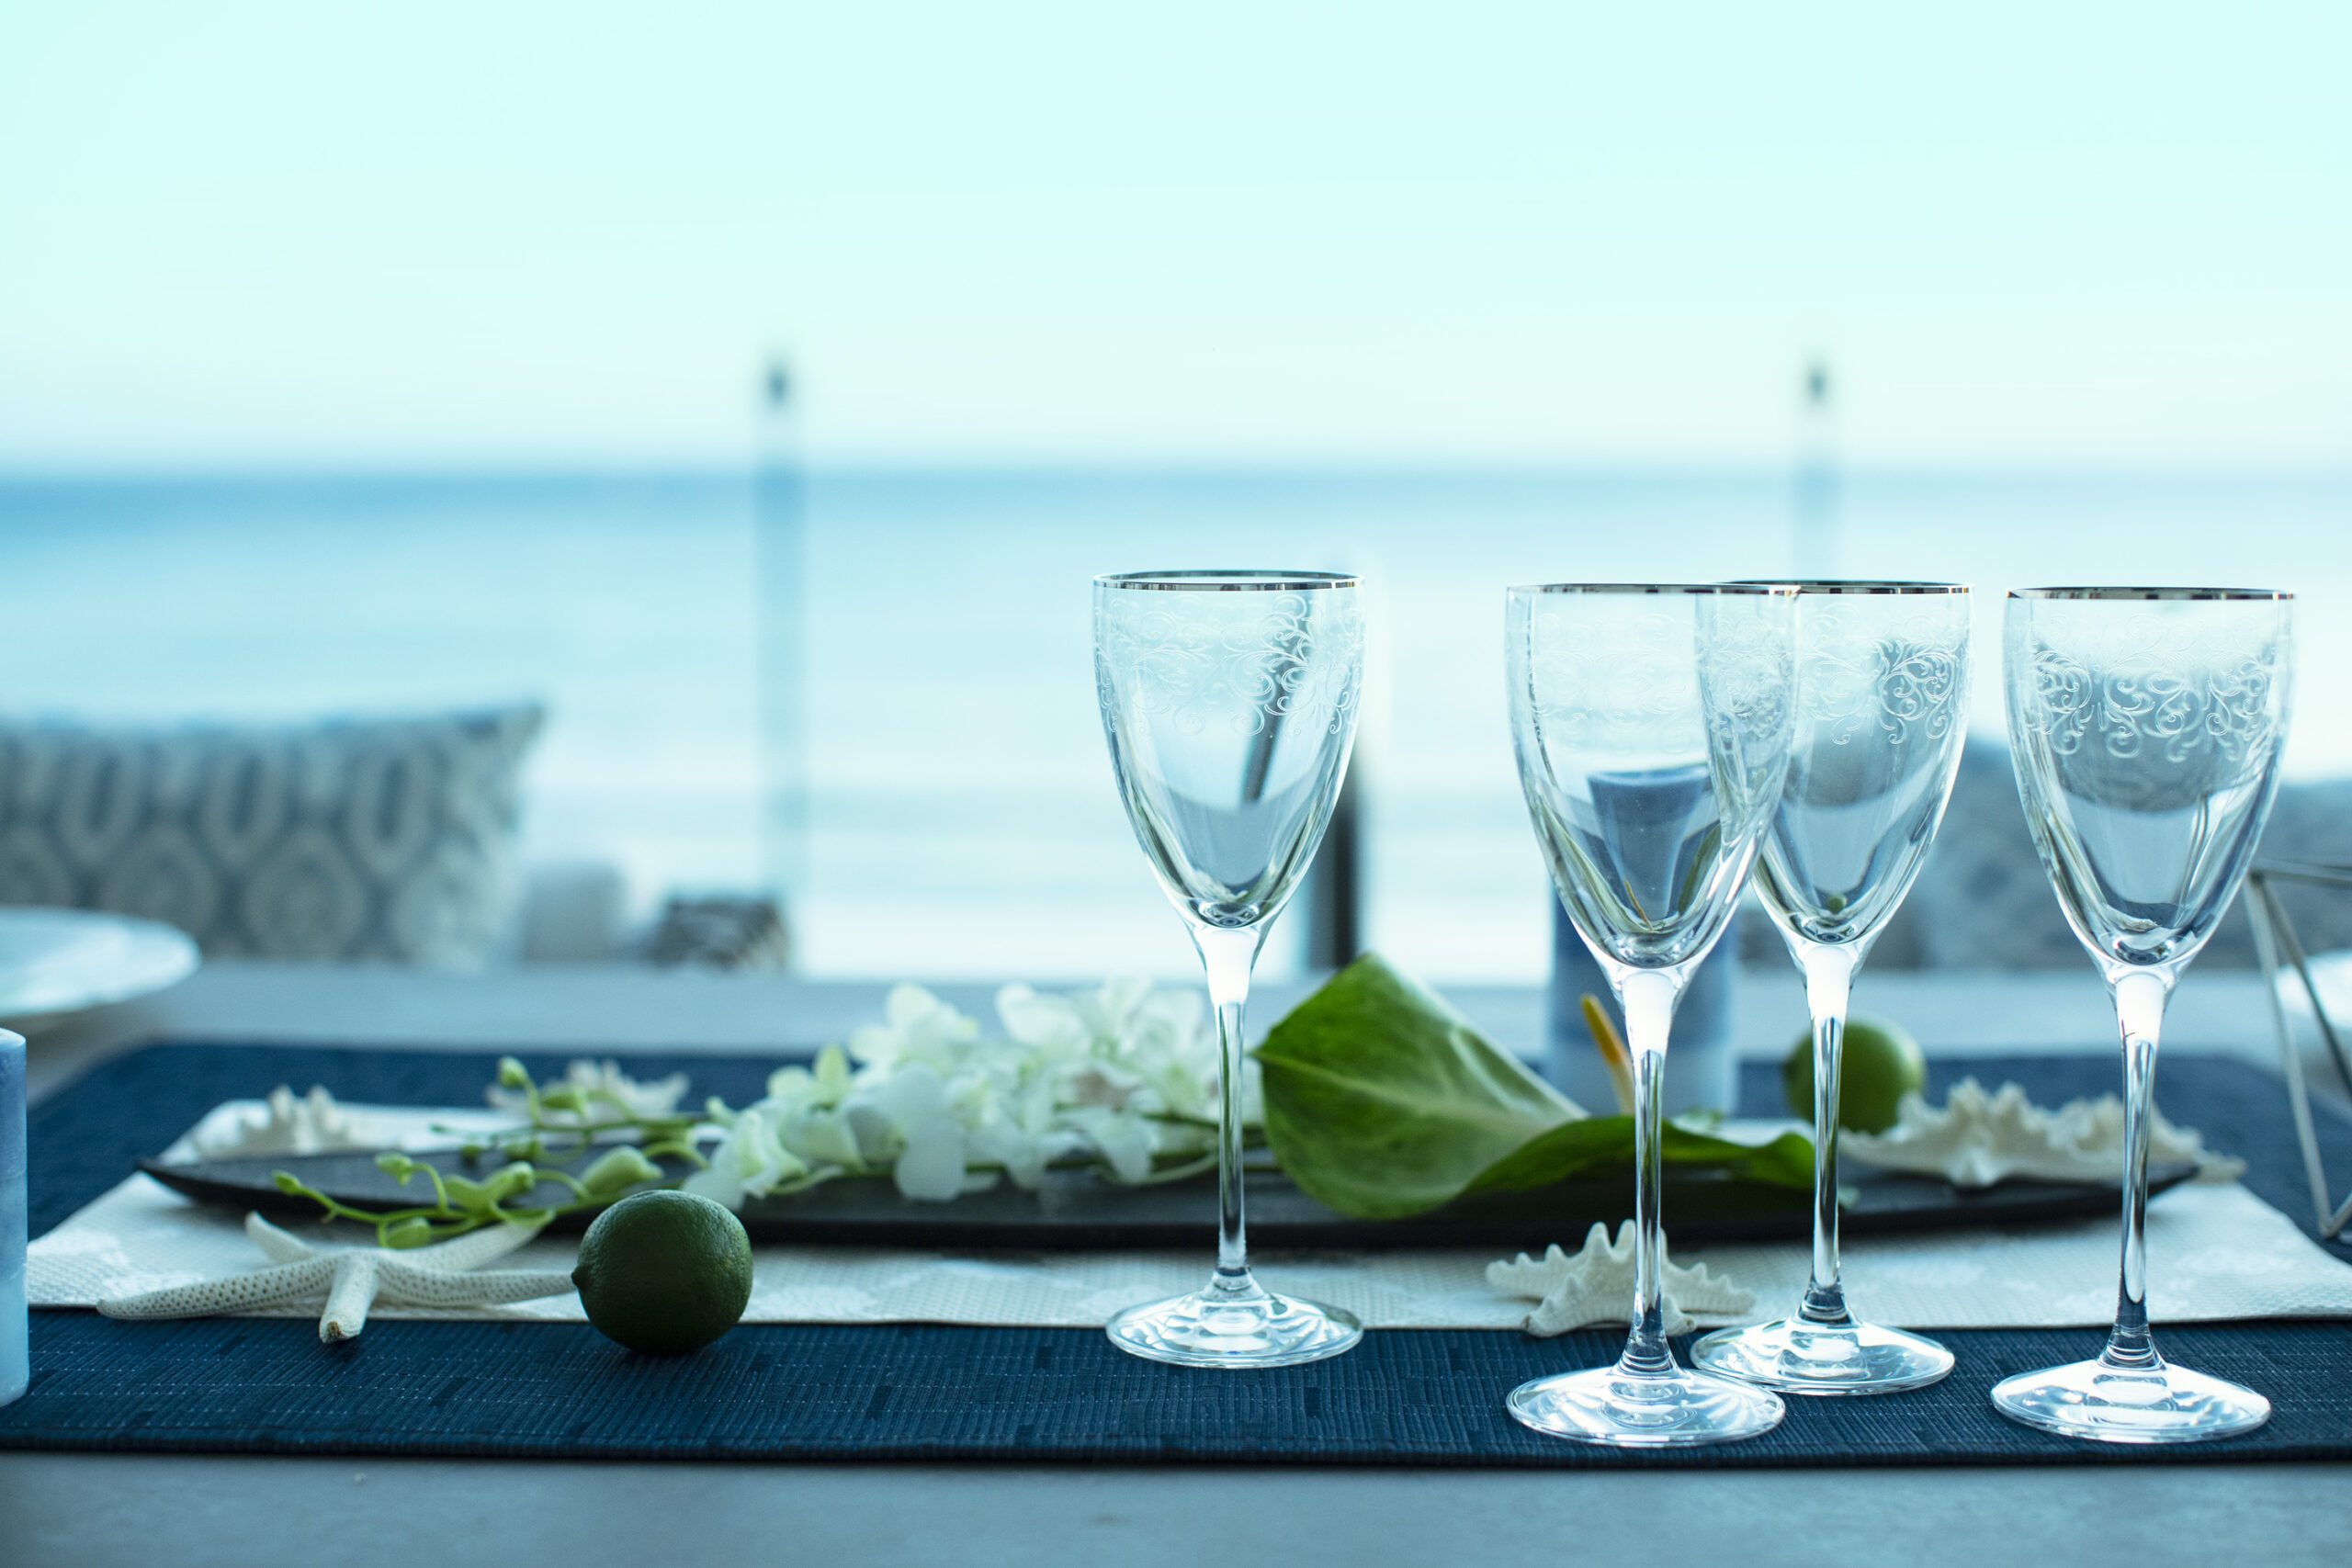 Glasses on table with view of ocean in the background.